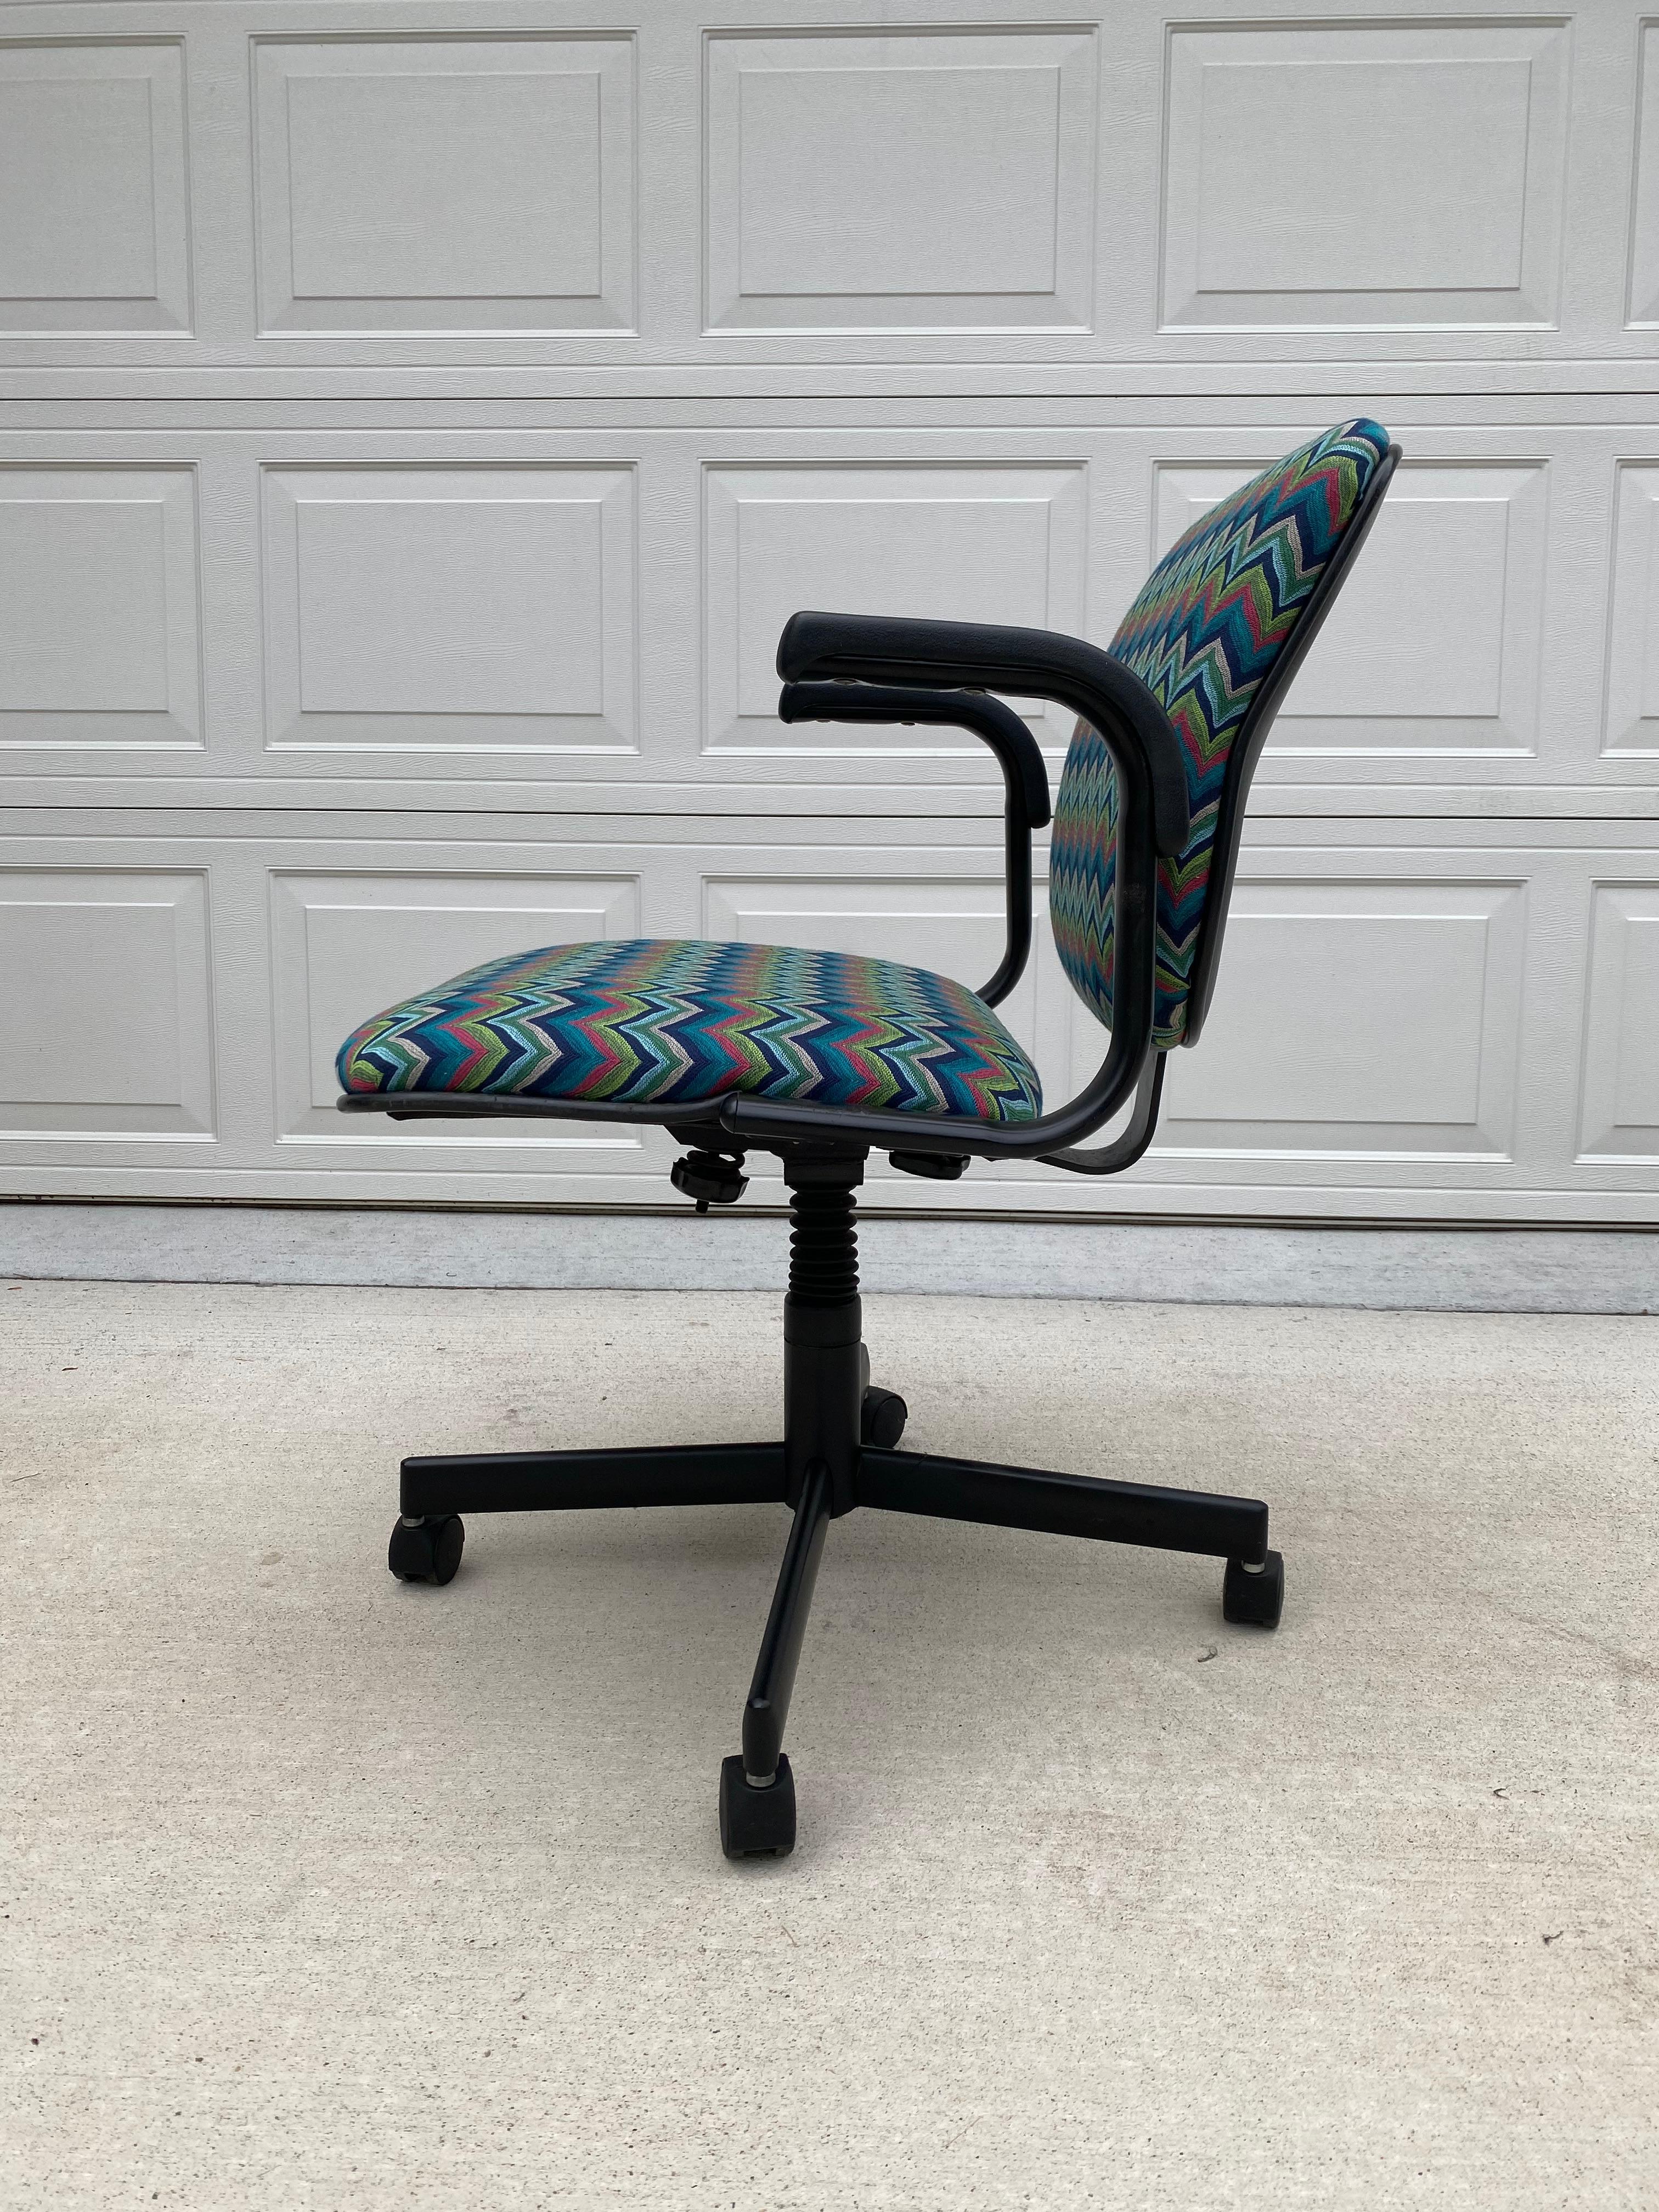 1980s Reupholstered Office Chair by Stylex, Inc. In Mid-Century Modern Fabric In Good Condition For Sale In Medina, OH